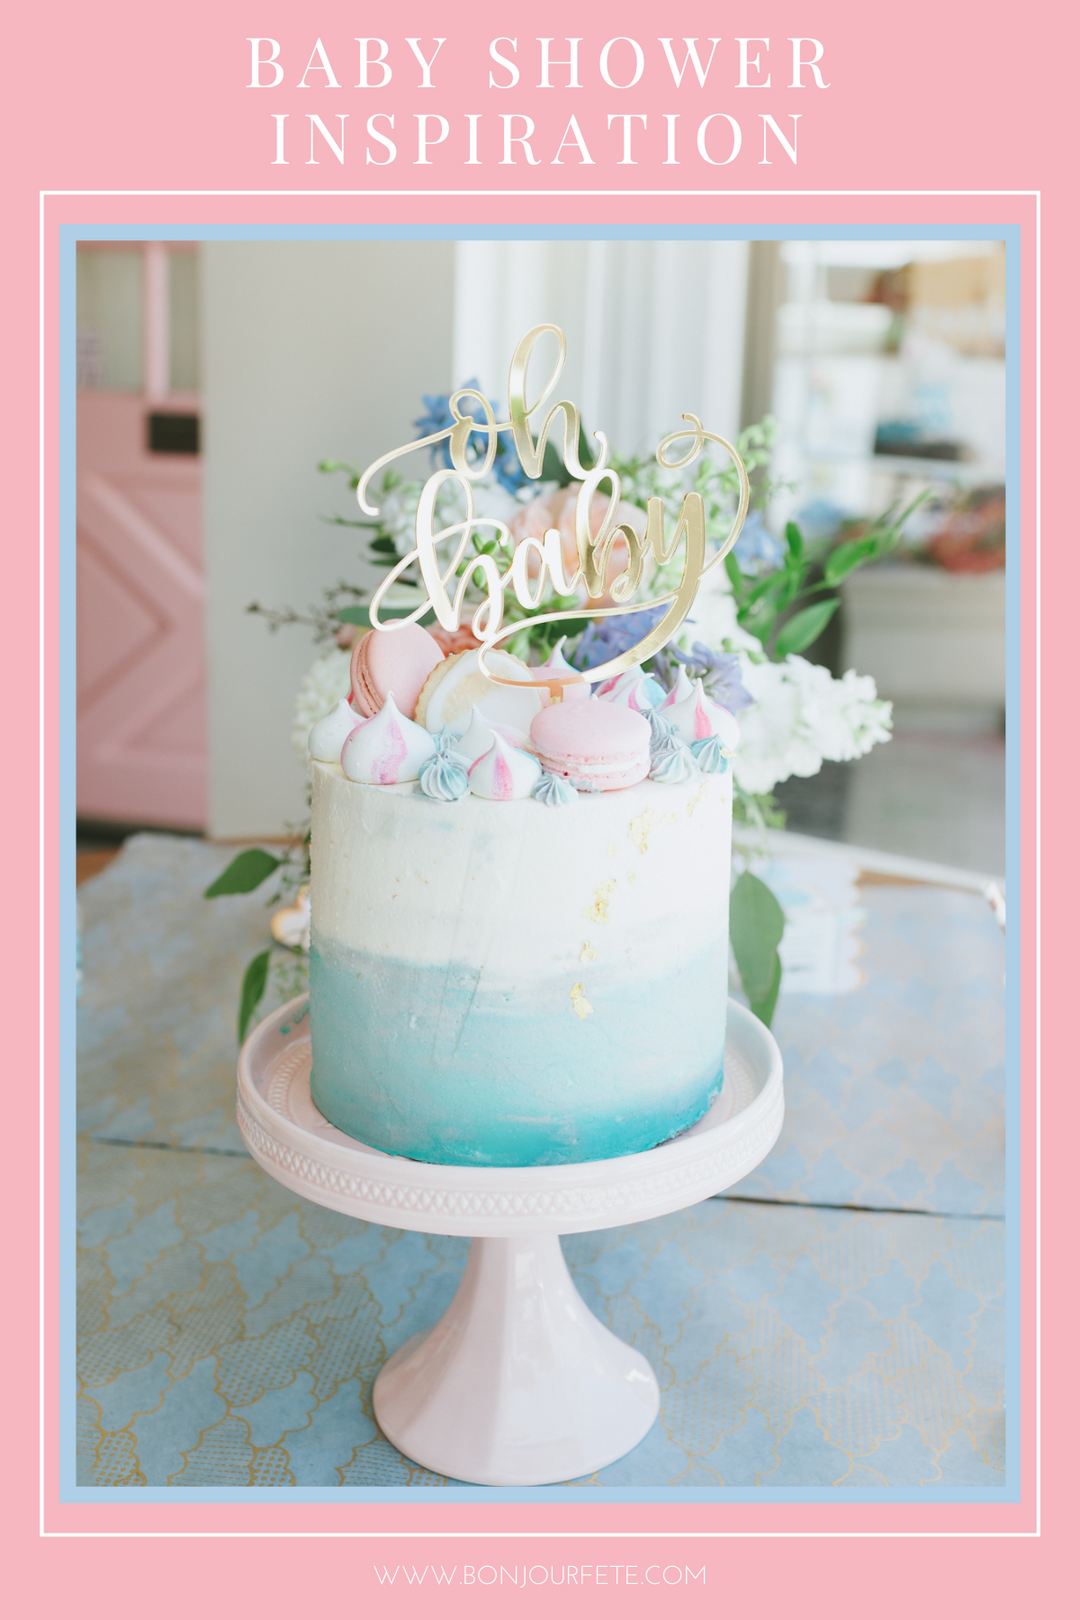 BABY SHOWER IDEAS FOR BABY GIRLS & BABY BOYS